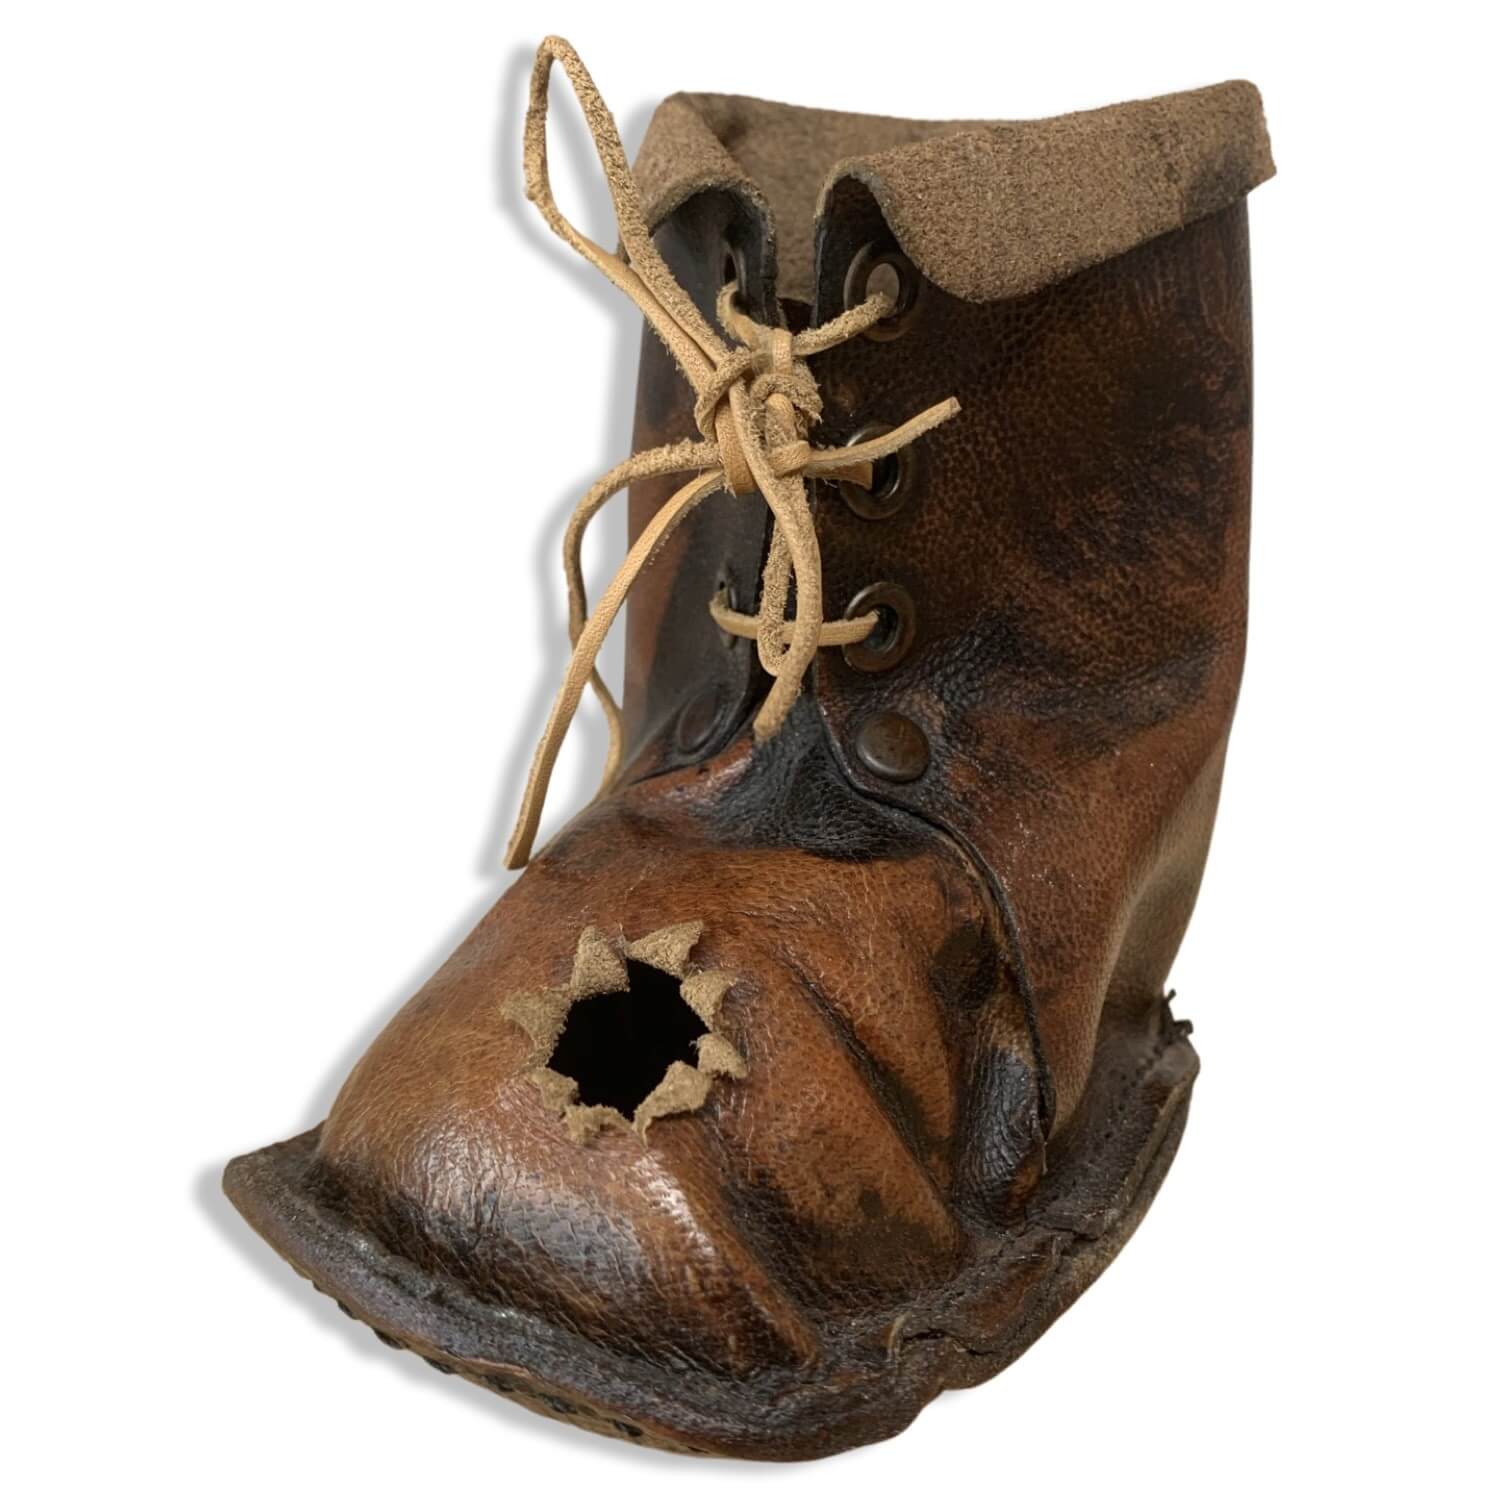 Leather Pen Holder - Soldier Boot With Bullet Hole